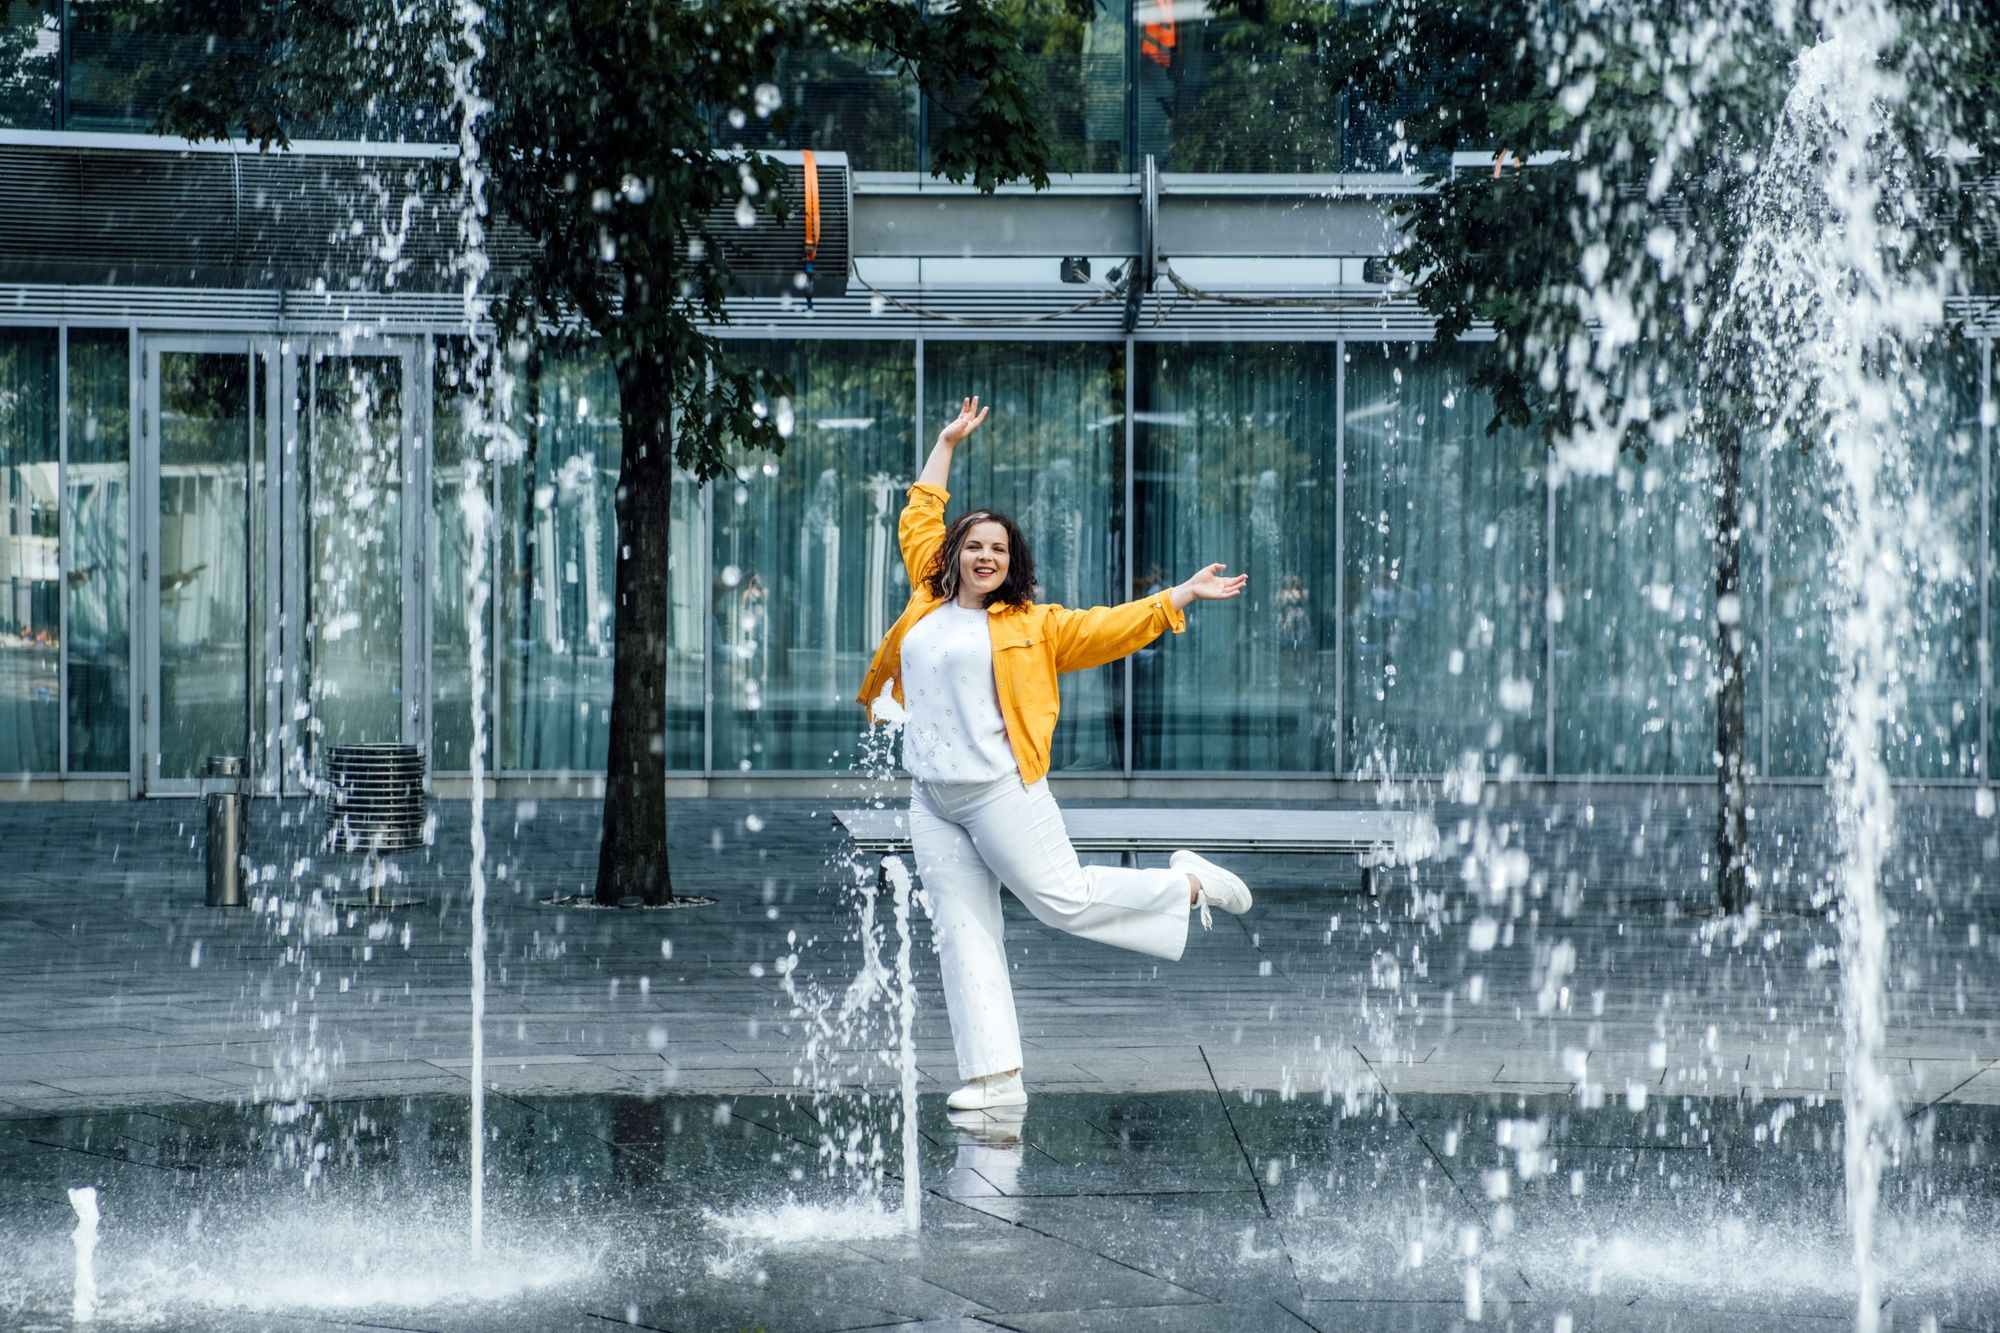 Caucasian person outside in water splash area looking happy and carefree